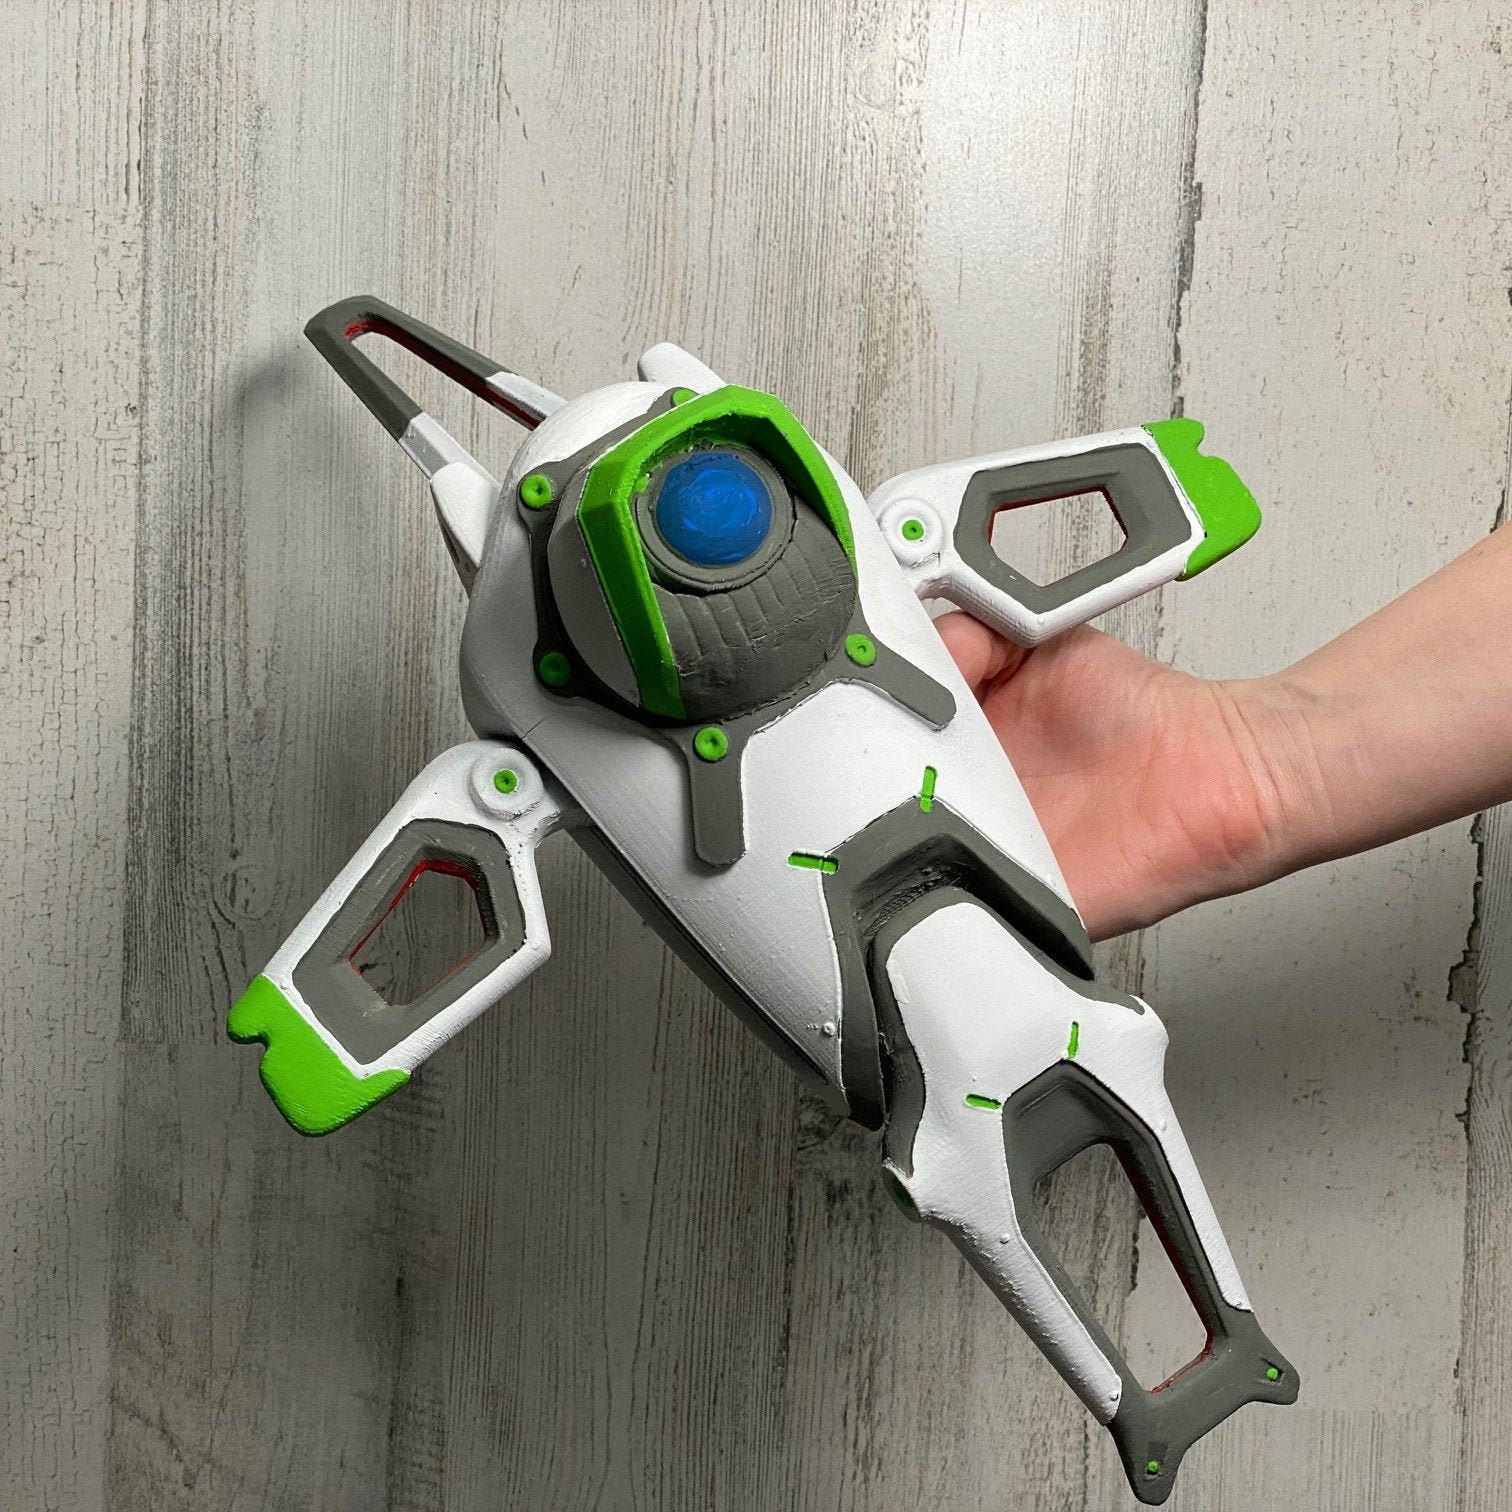 Crypto Drone Battle 3D Prop Toy - Etsy